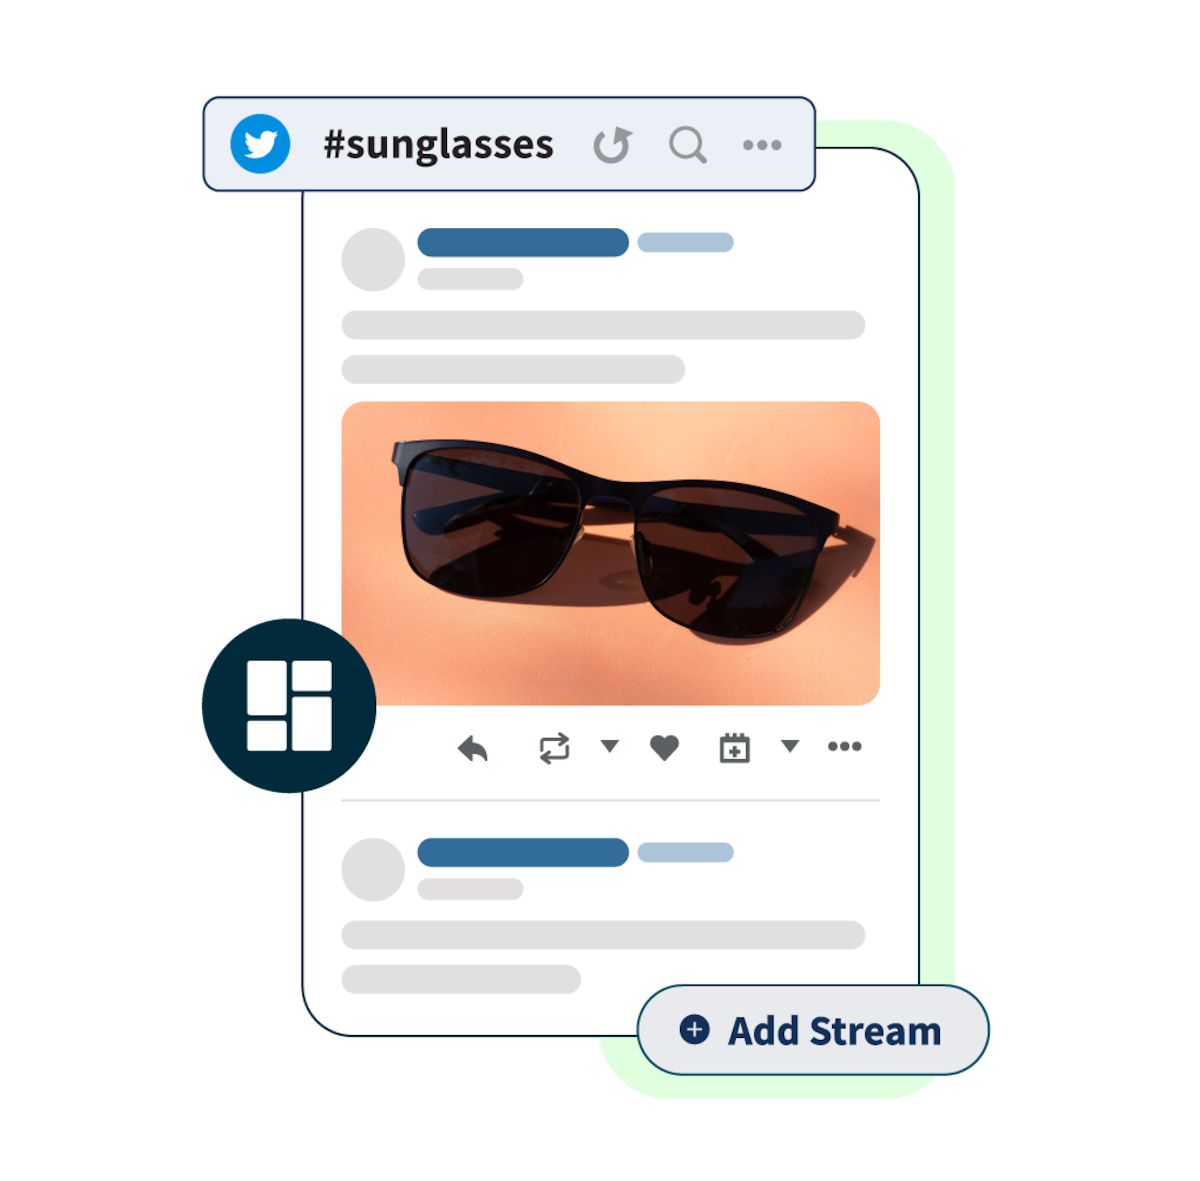 Twitter post of sunglasses with sunglasses hashtag and add stream pop-up